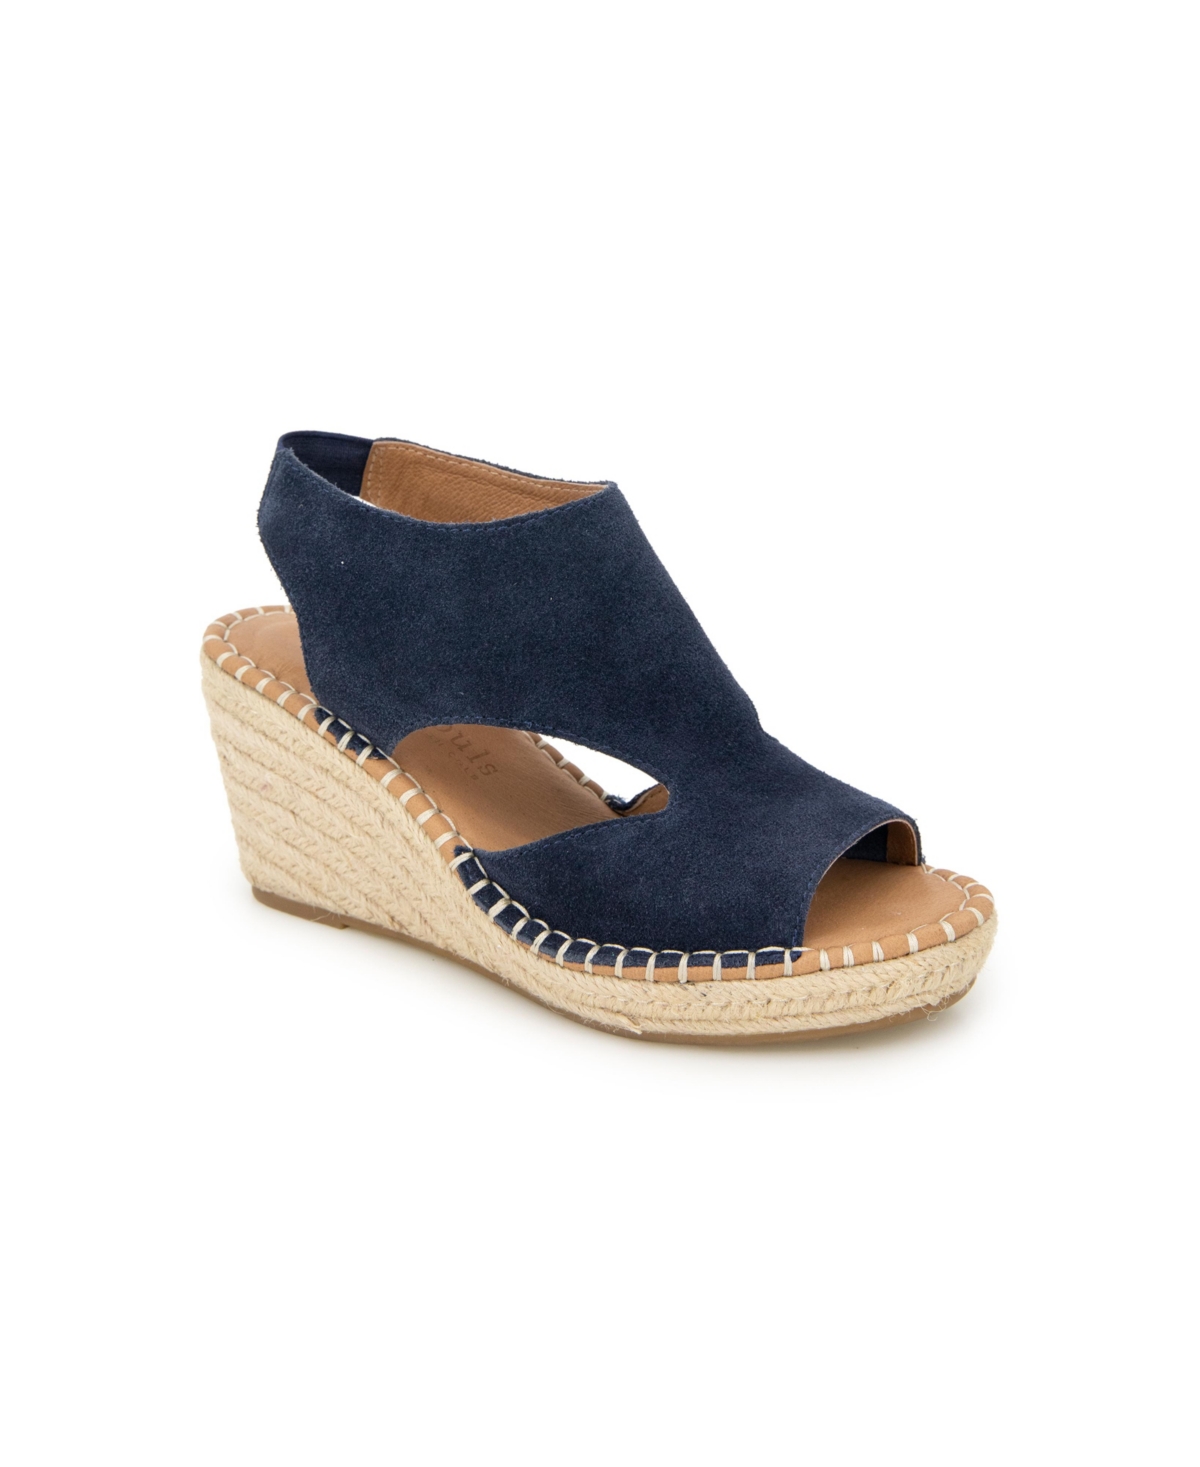 Women's Cody Pull-On Sandals - Luggage Suede